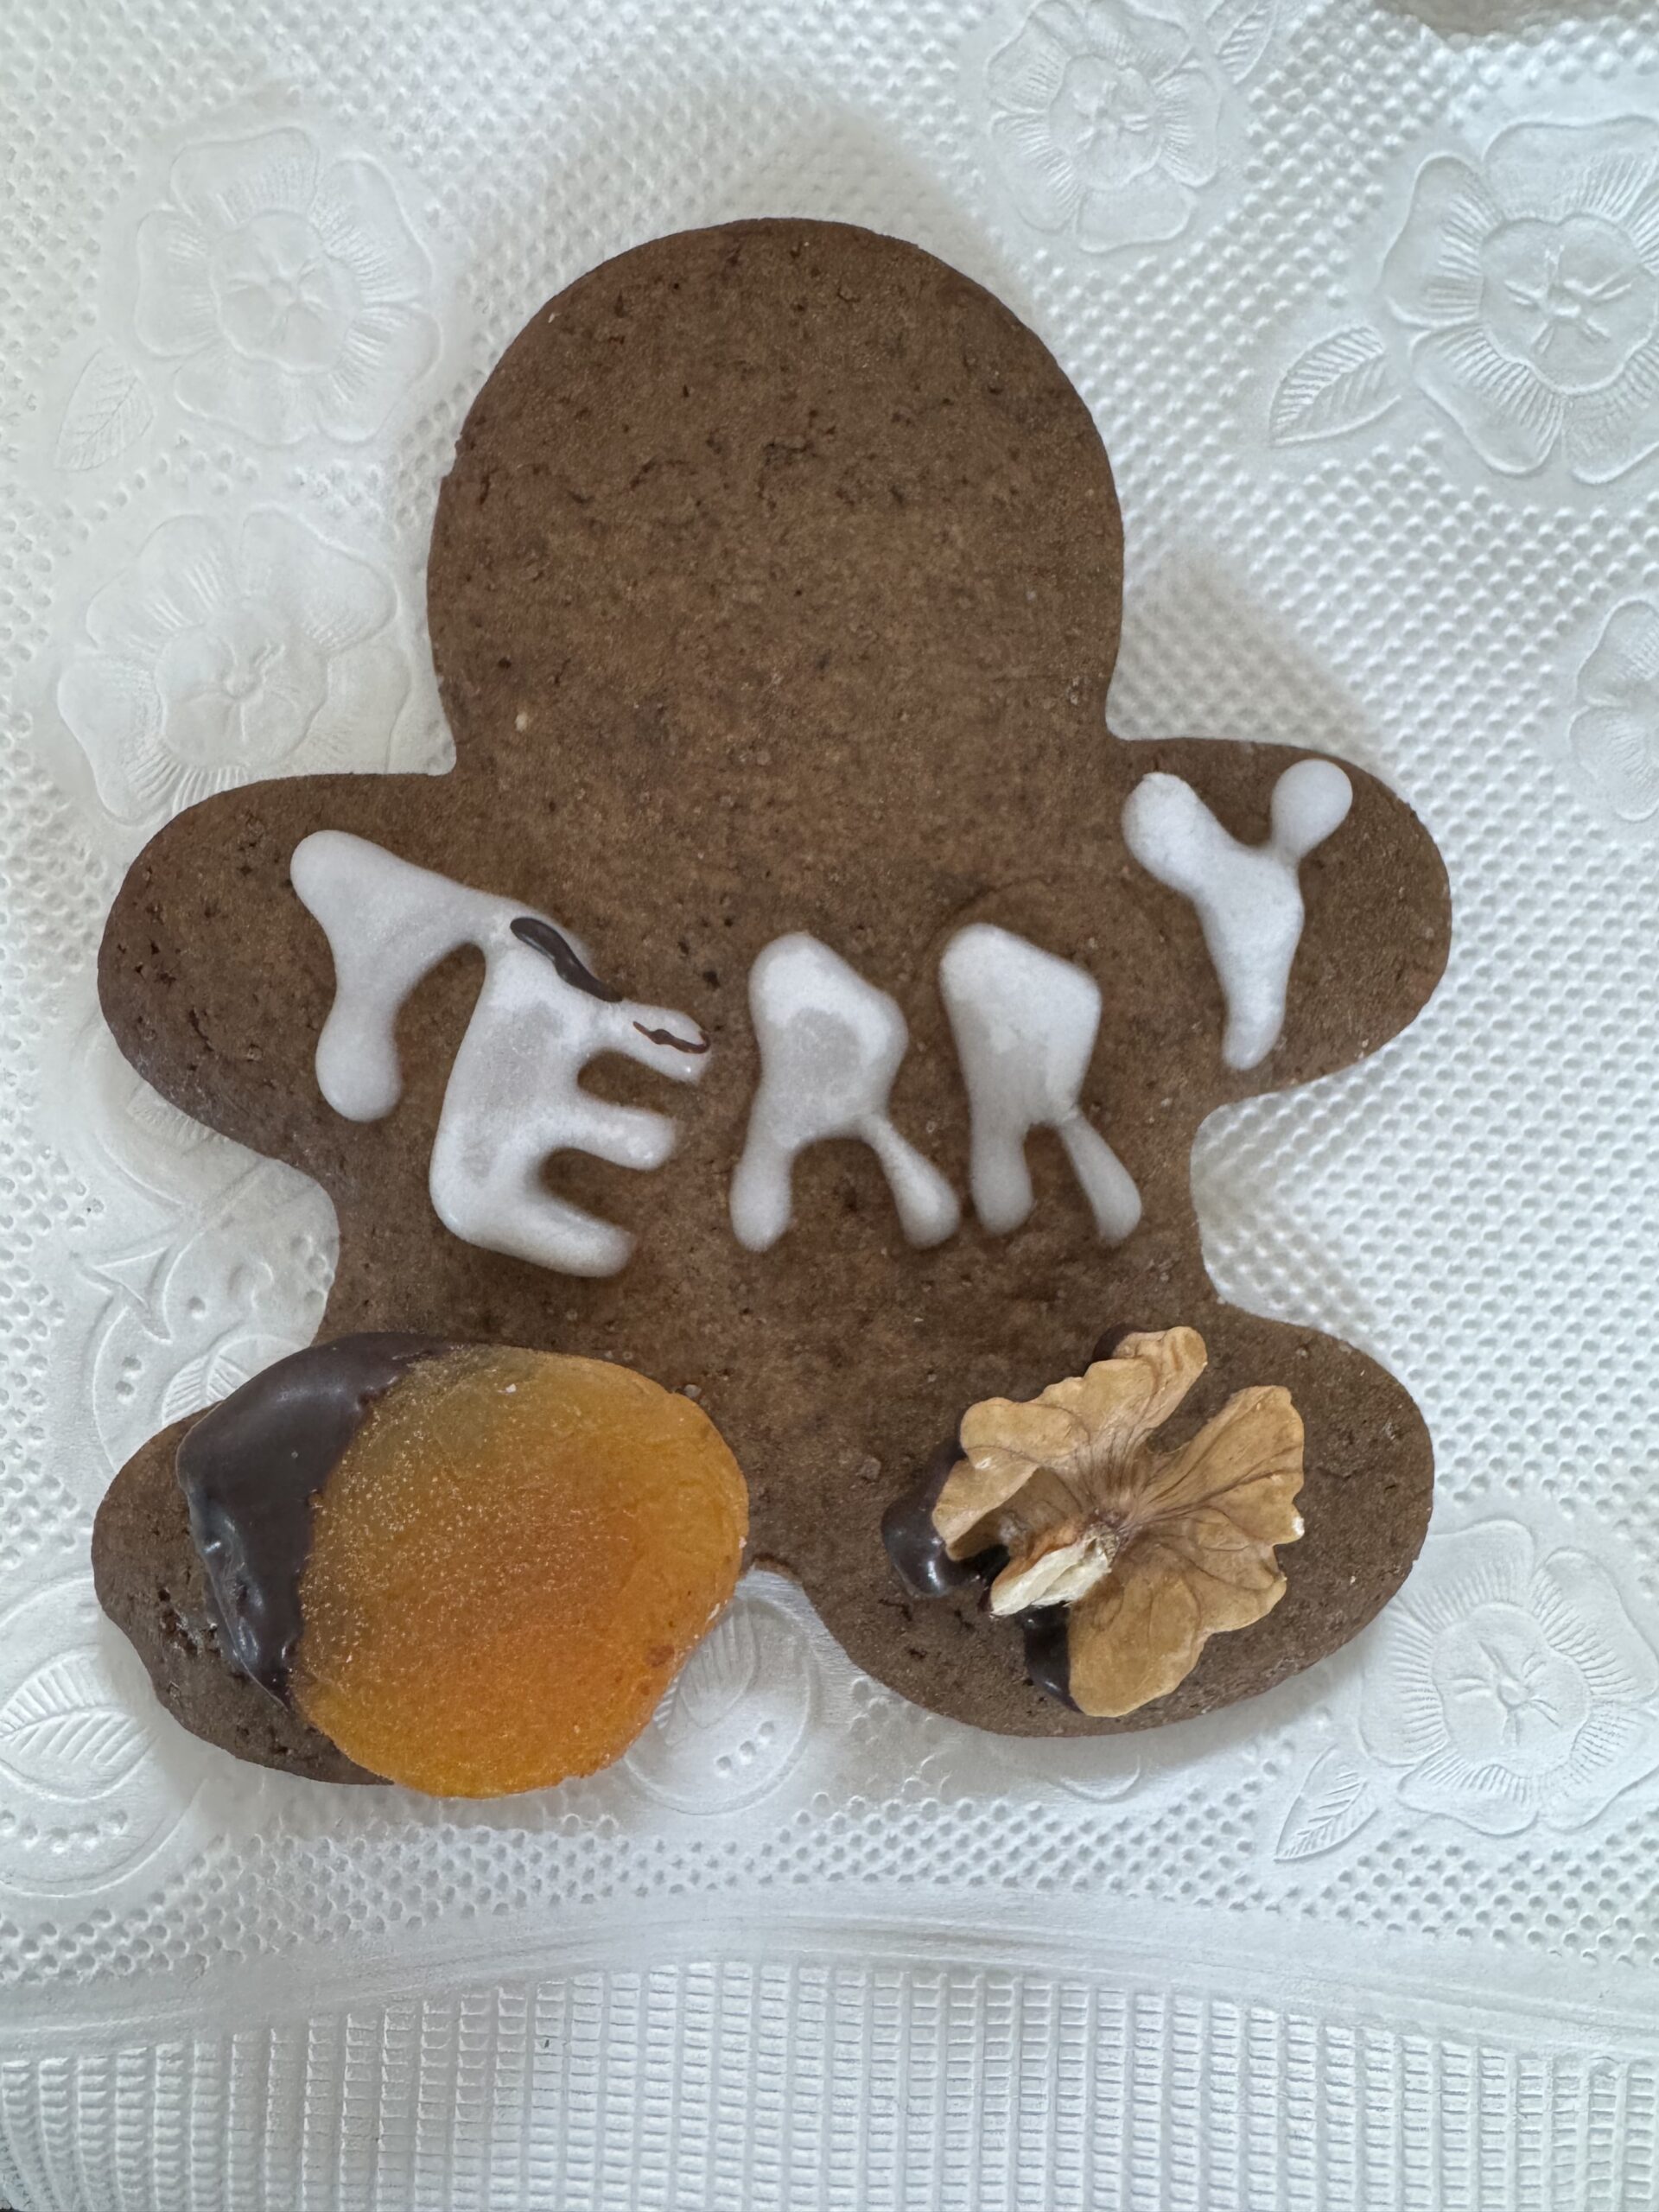 A gingerbread cookie in the shape of a person with Terry written with white icing and  chocolate dipped apricot and walnut boots